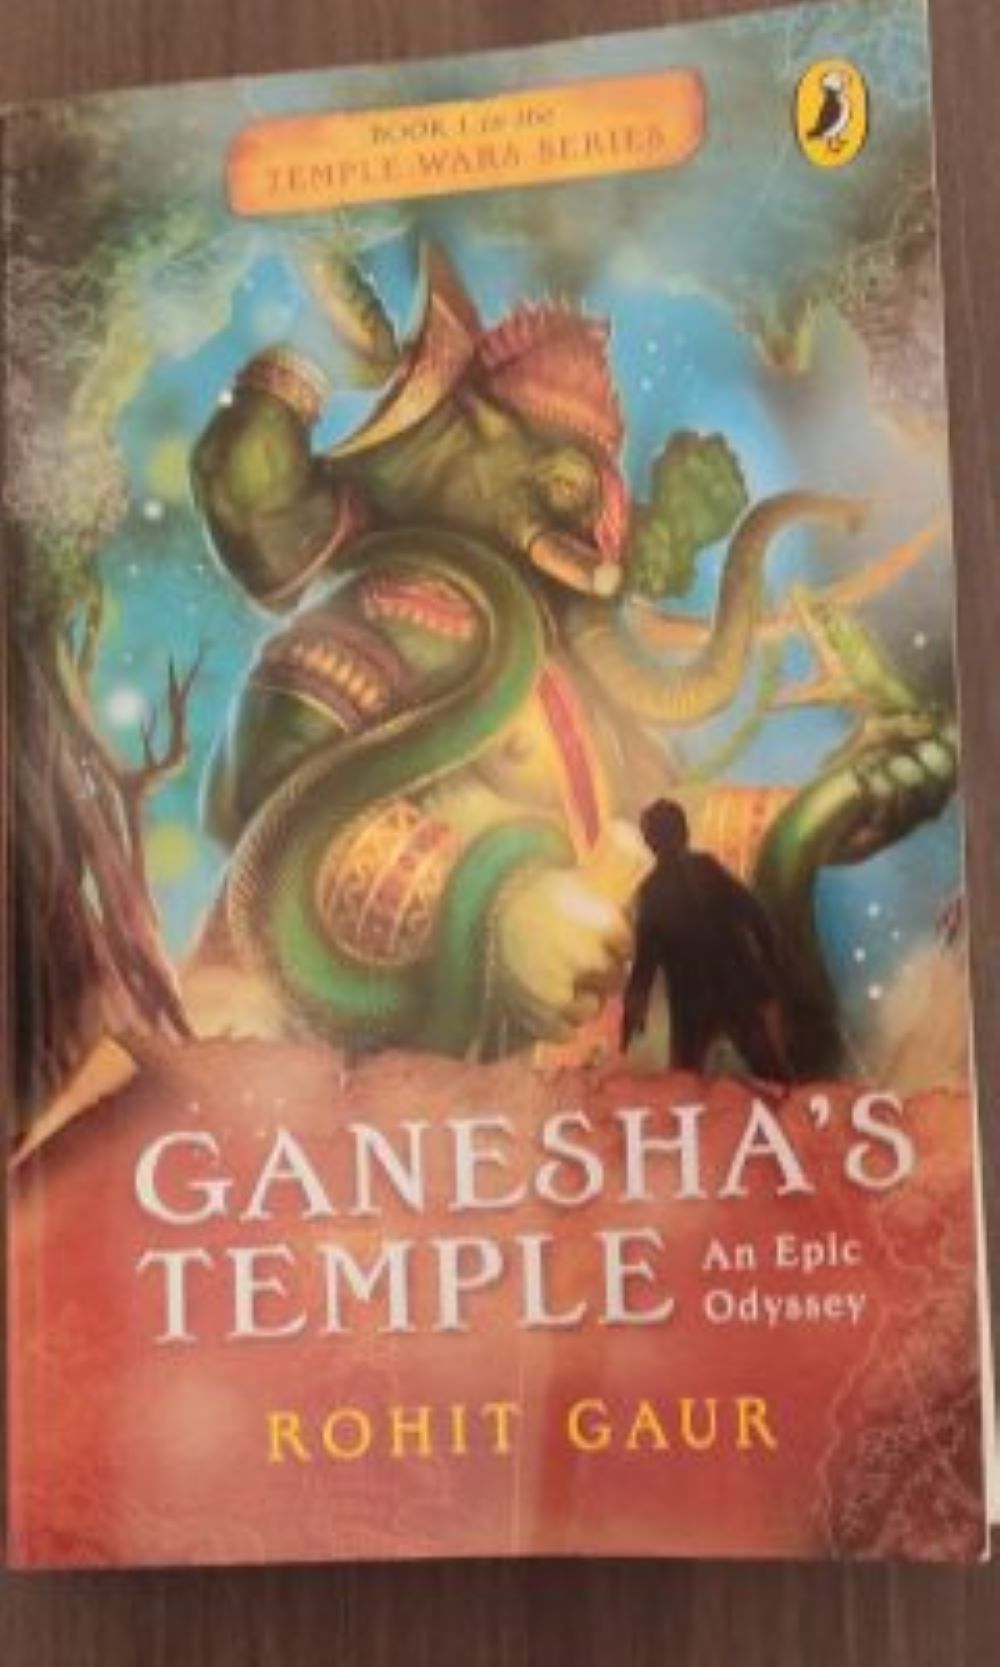 Review: Ganesha’s Temple – An Epic Odyssey